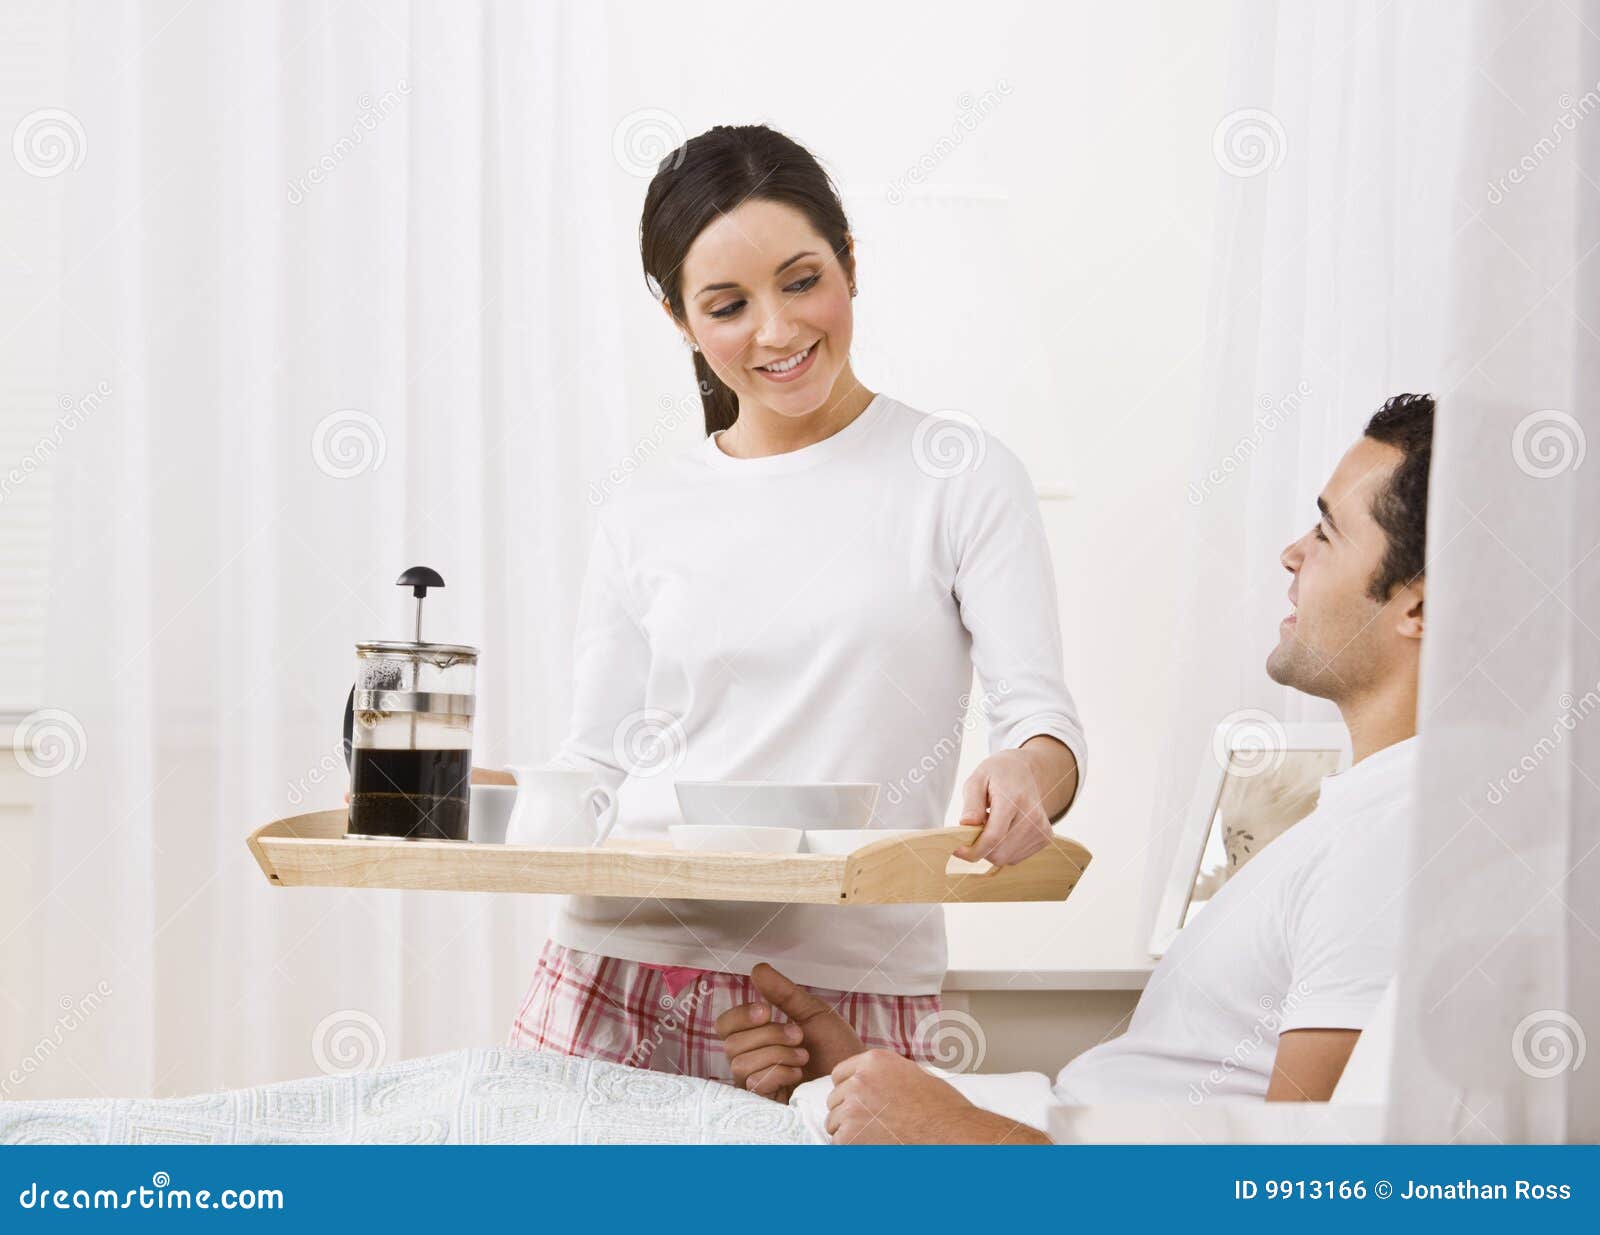 Woman Serving Breakfast Tray To Man Stock Photo - Image of female, hair